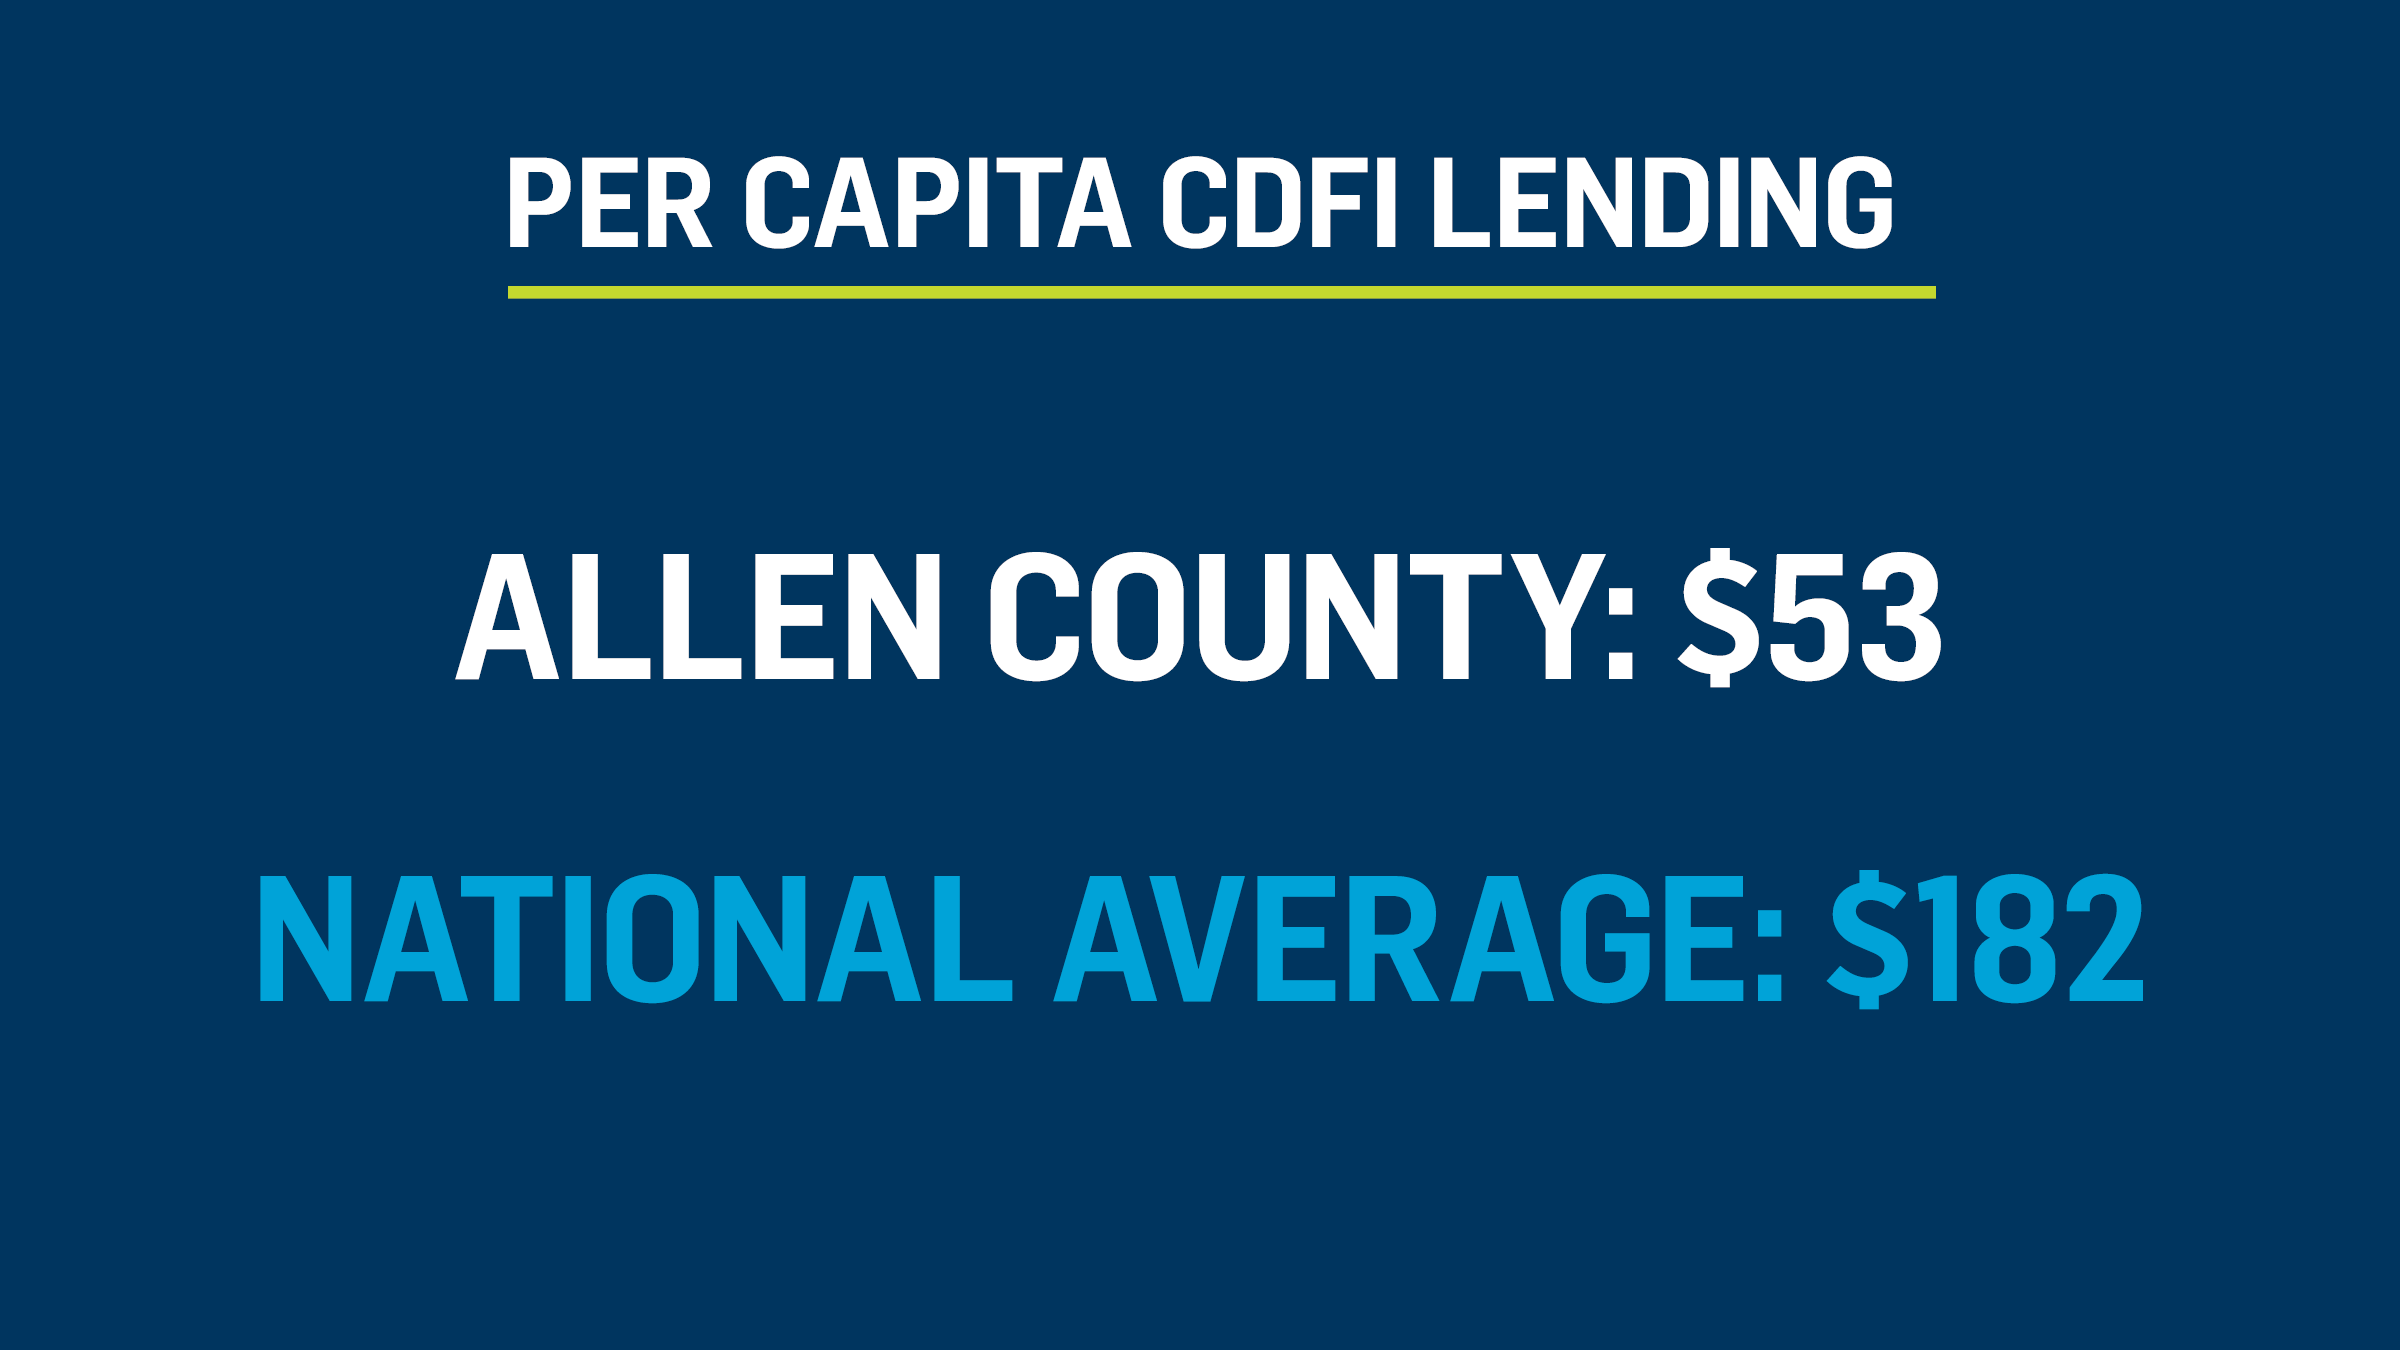 According to Greater Fort Wayne Inc., Allen County trails behind the national average in terms of per capita CDFI lending.